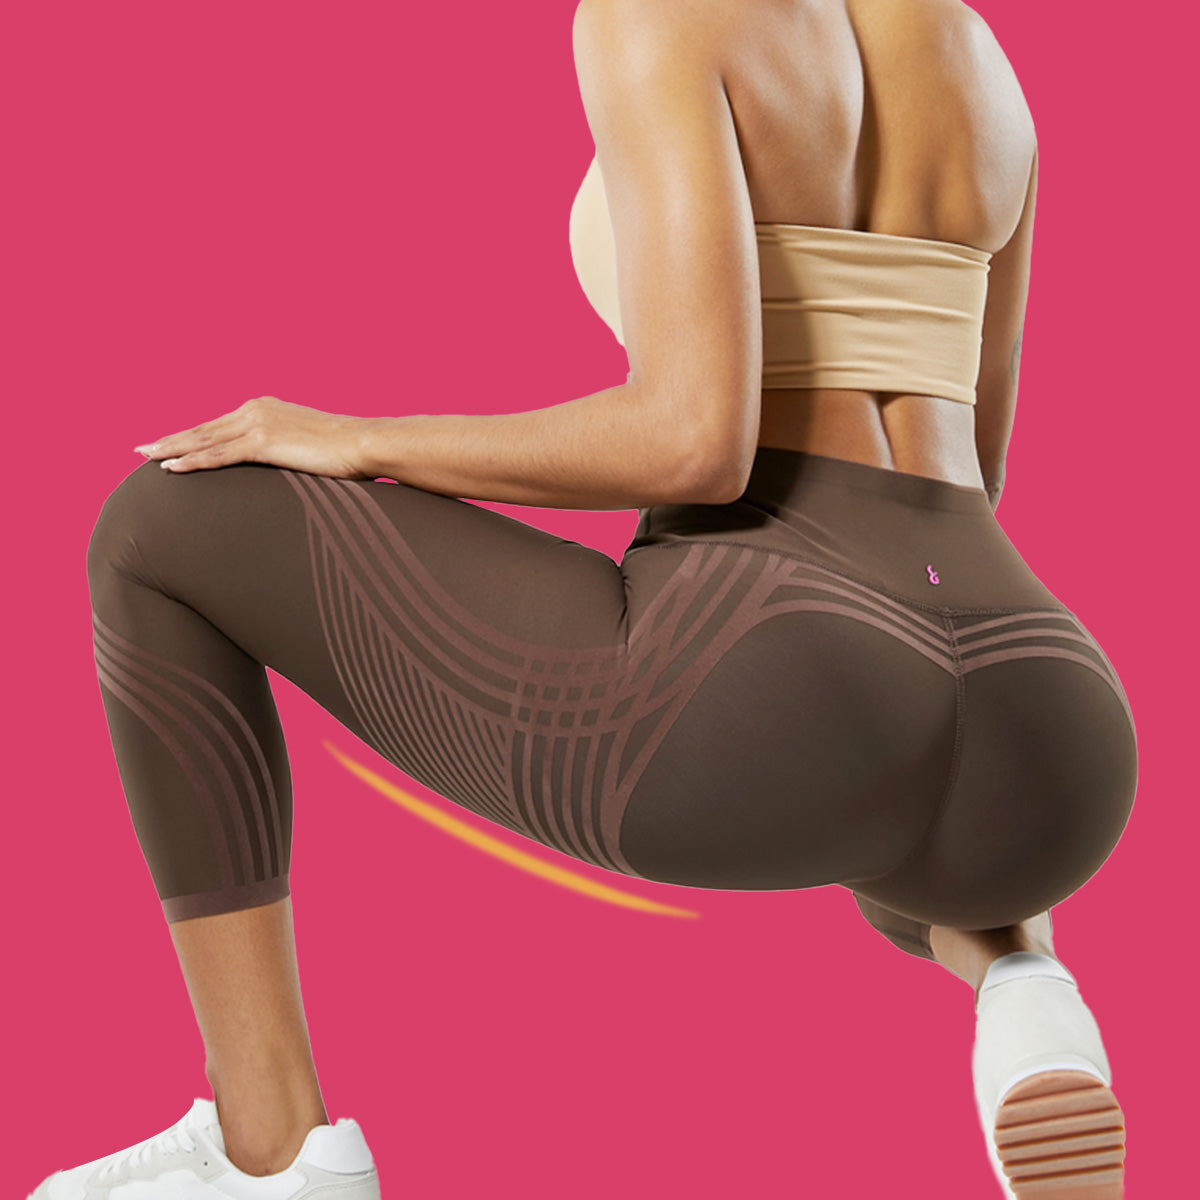 These Body Sculpting Leggings Designed For Thick Thighs And Cellulite –  Fanka